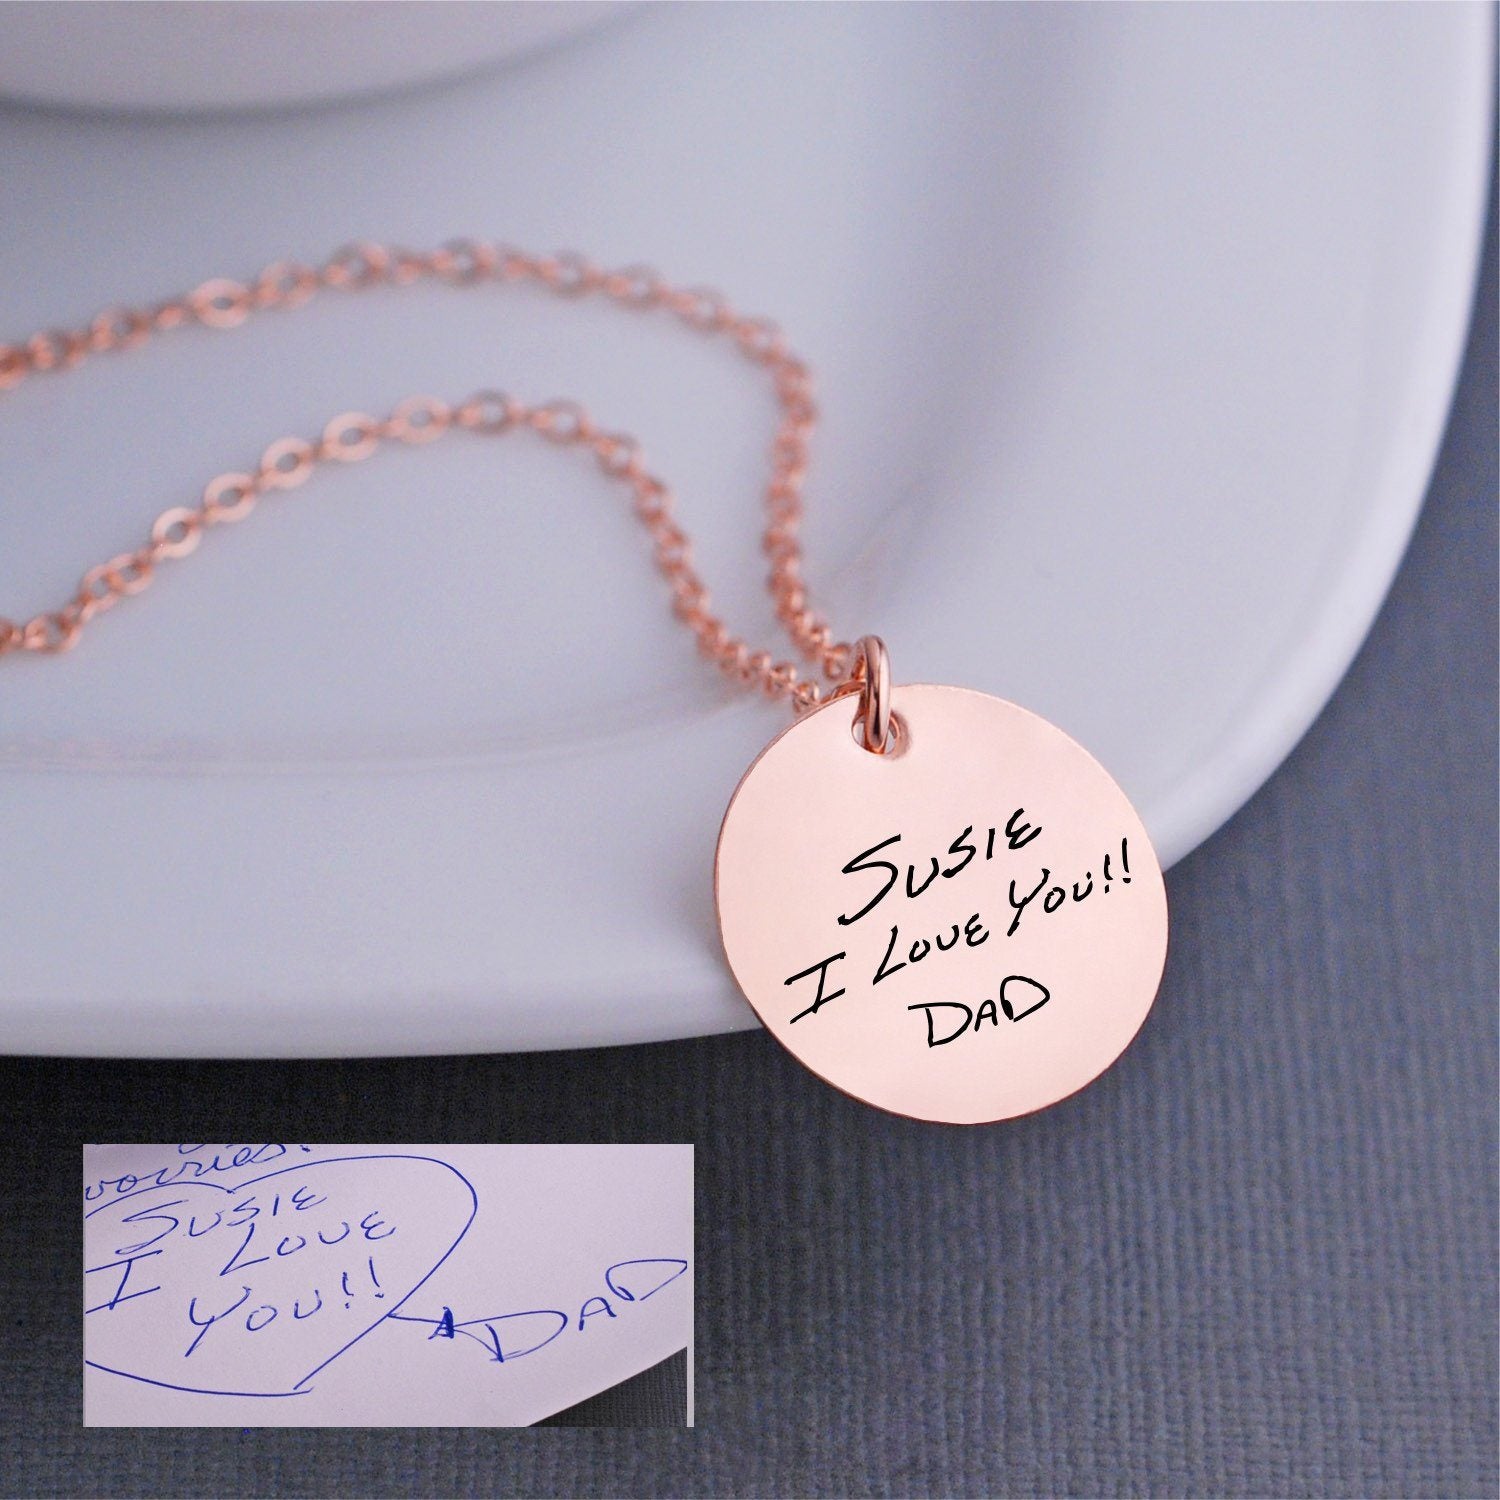 Custom Handwriting Necklace 3/4 inch – Necklace – georgie designs personalized jewelry